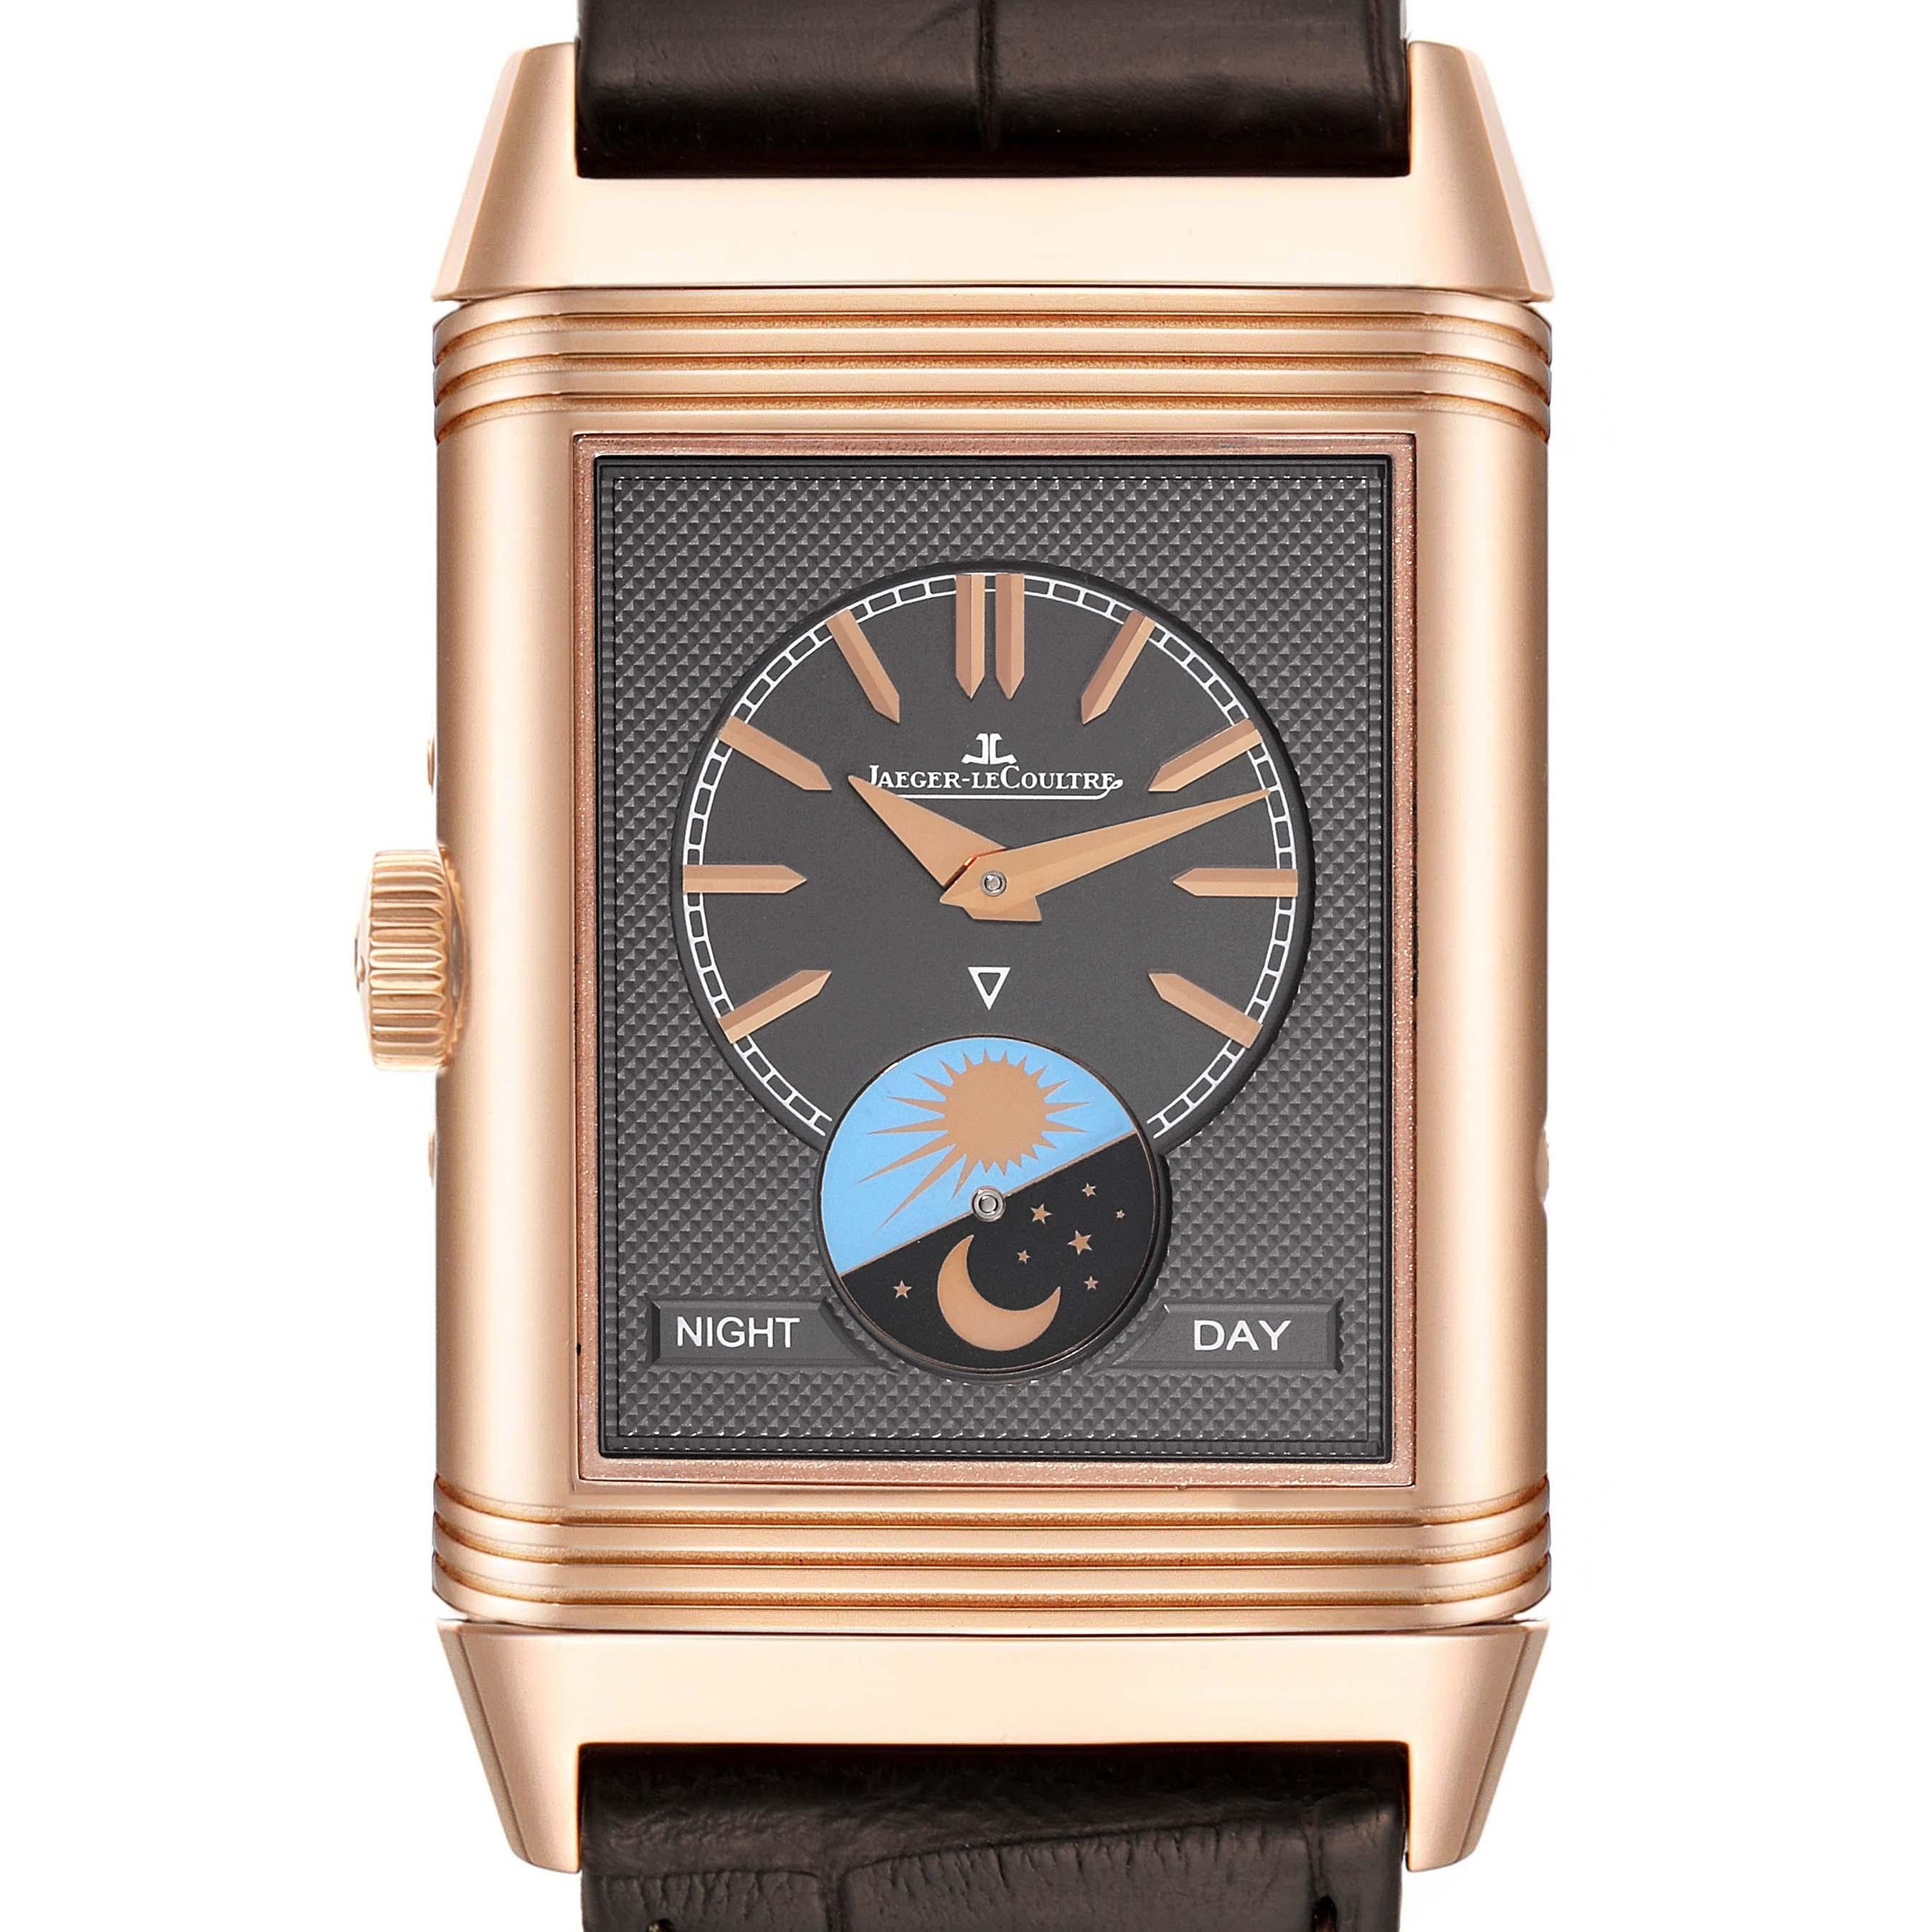 Jaeger LeCoultre Reverso Tribute Duoface Rose Gold Mens Watch Q3912420 Box Card. Manual-winding movement. Rhodium plated with engine turned embellishment, 19 jewels, 223 components, a single barrel, blued screws, shock absorber system, straight-line